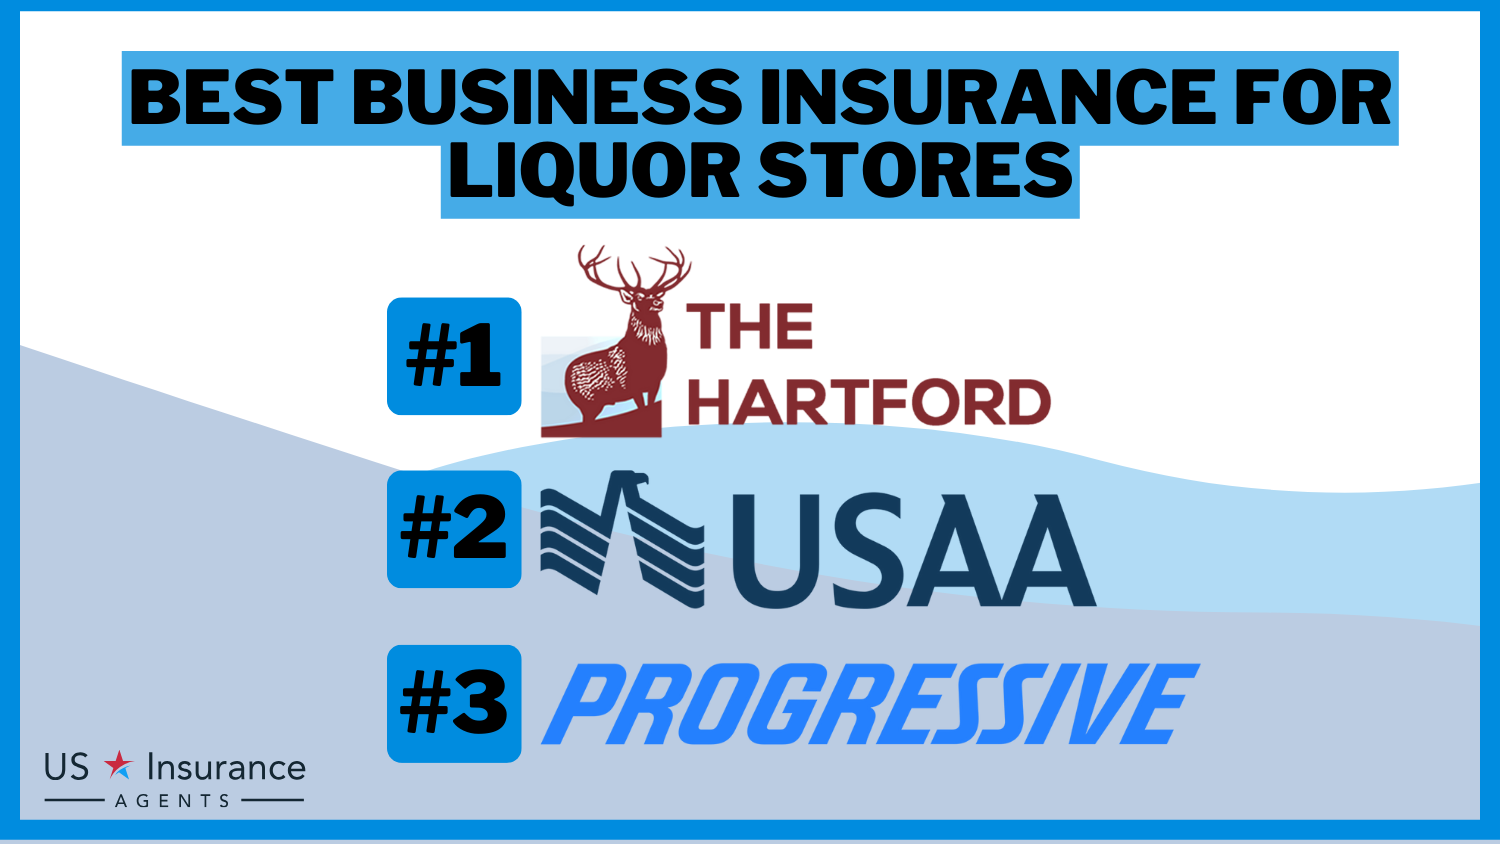 3 Best Business Insurance for Liquor Stores: The Hartford, USAA and Progressive.